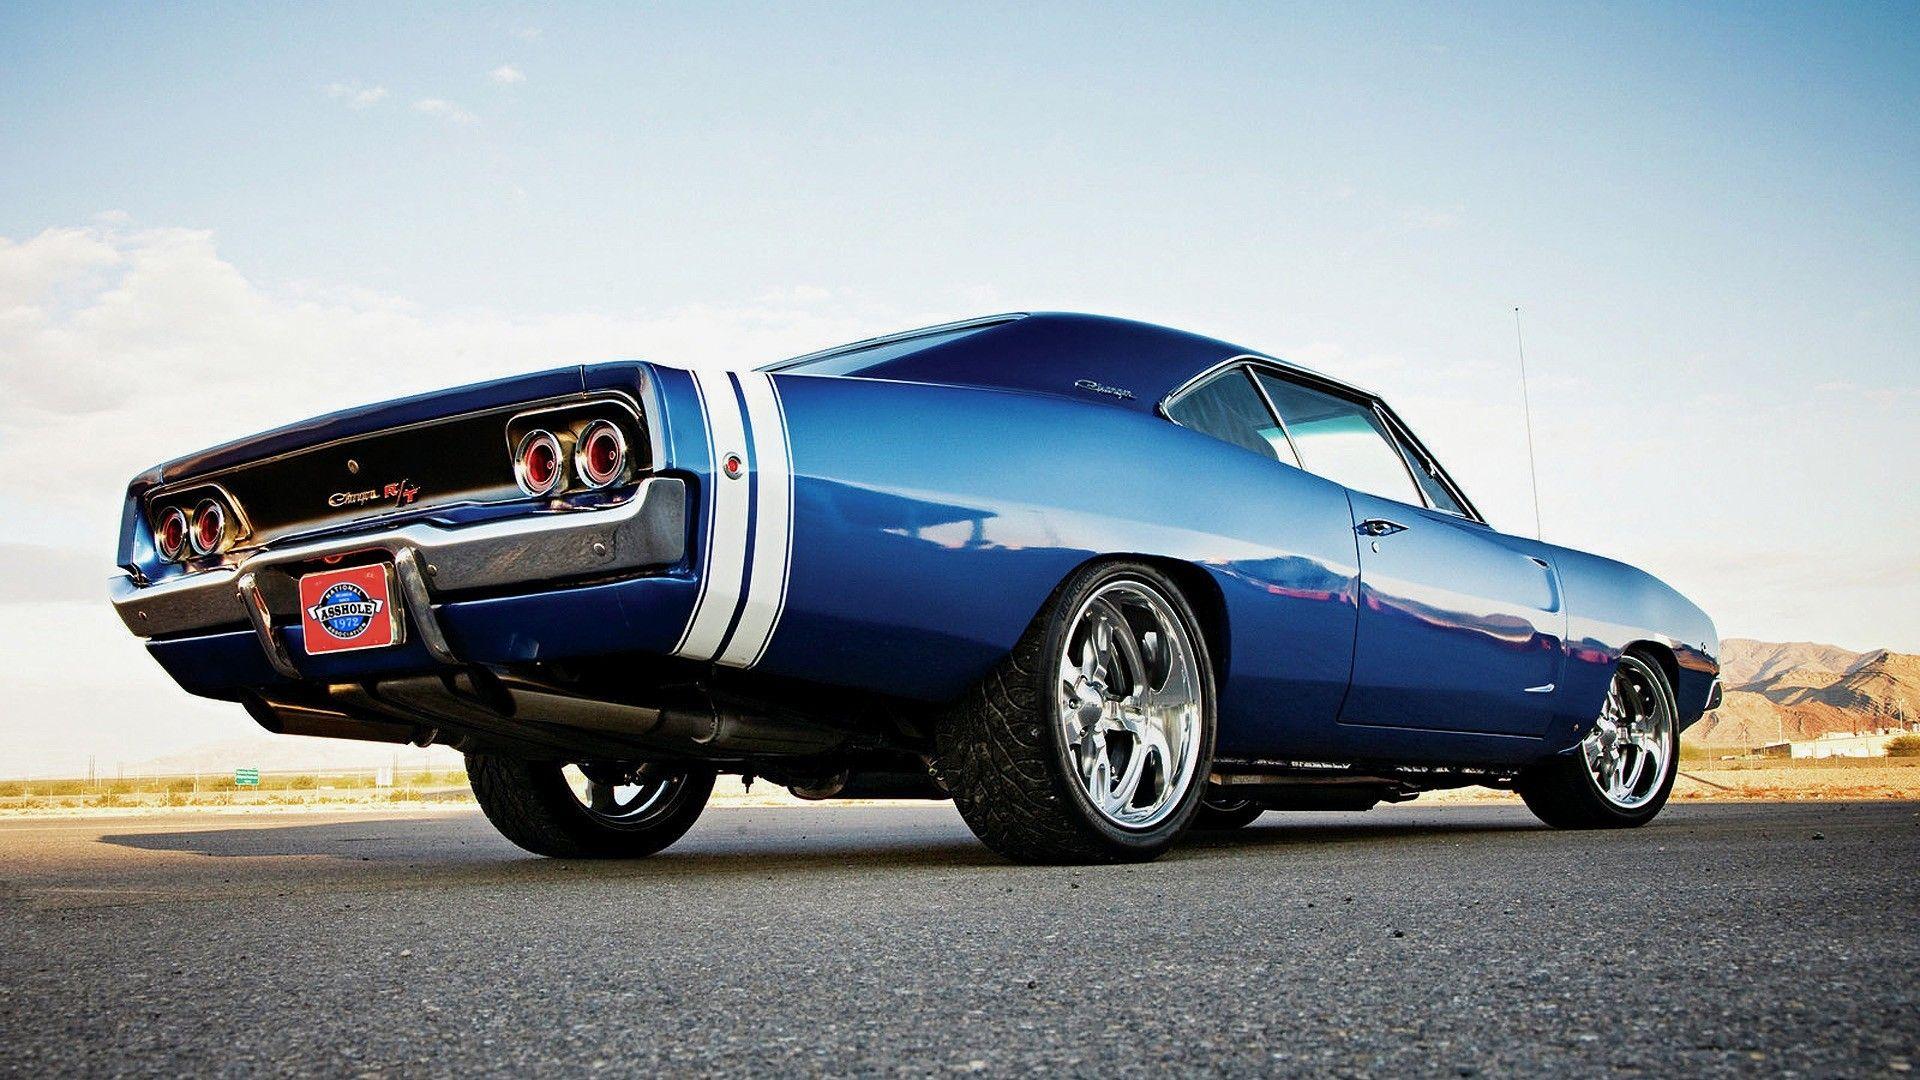 Wallpaper.wiki Blue 1970 Dodge Charger Background Free PIC